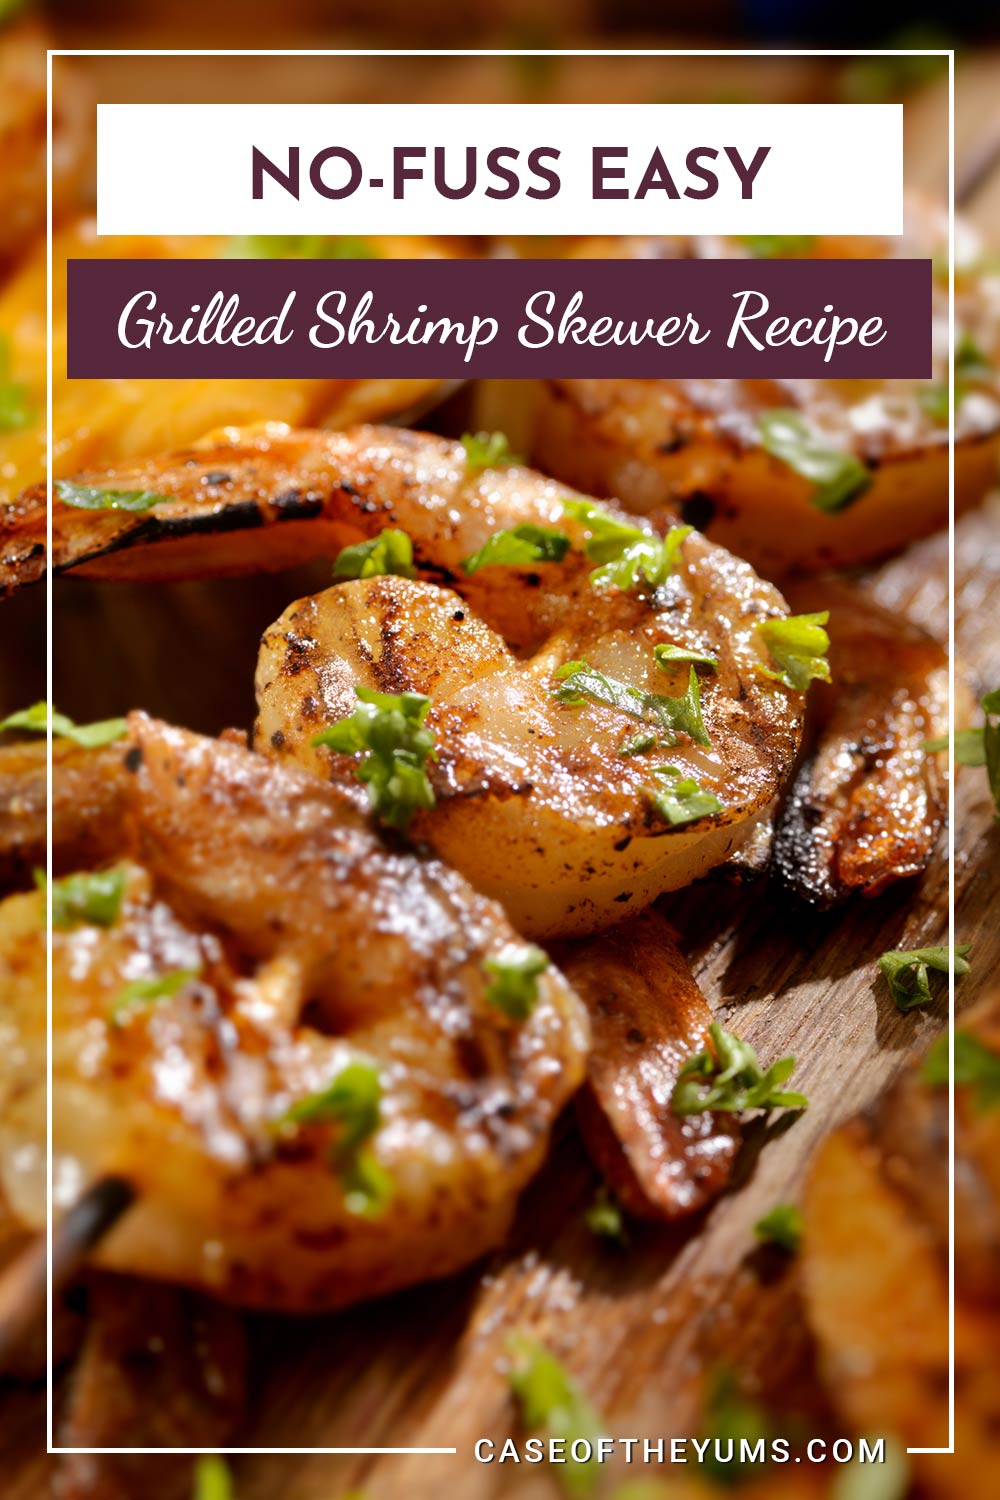 Grilled Shrimp on a wooden tray - No-Fuss Easy Grilled Shrimp Skewer Recipe.